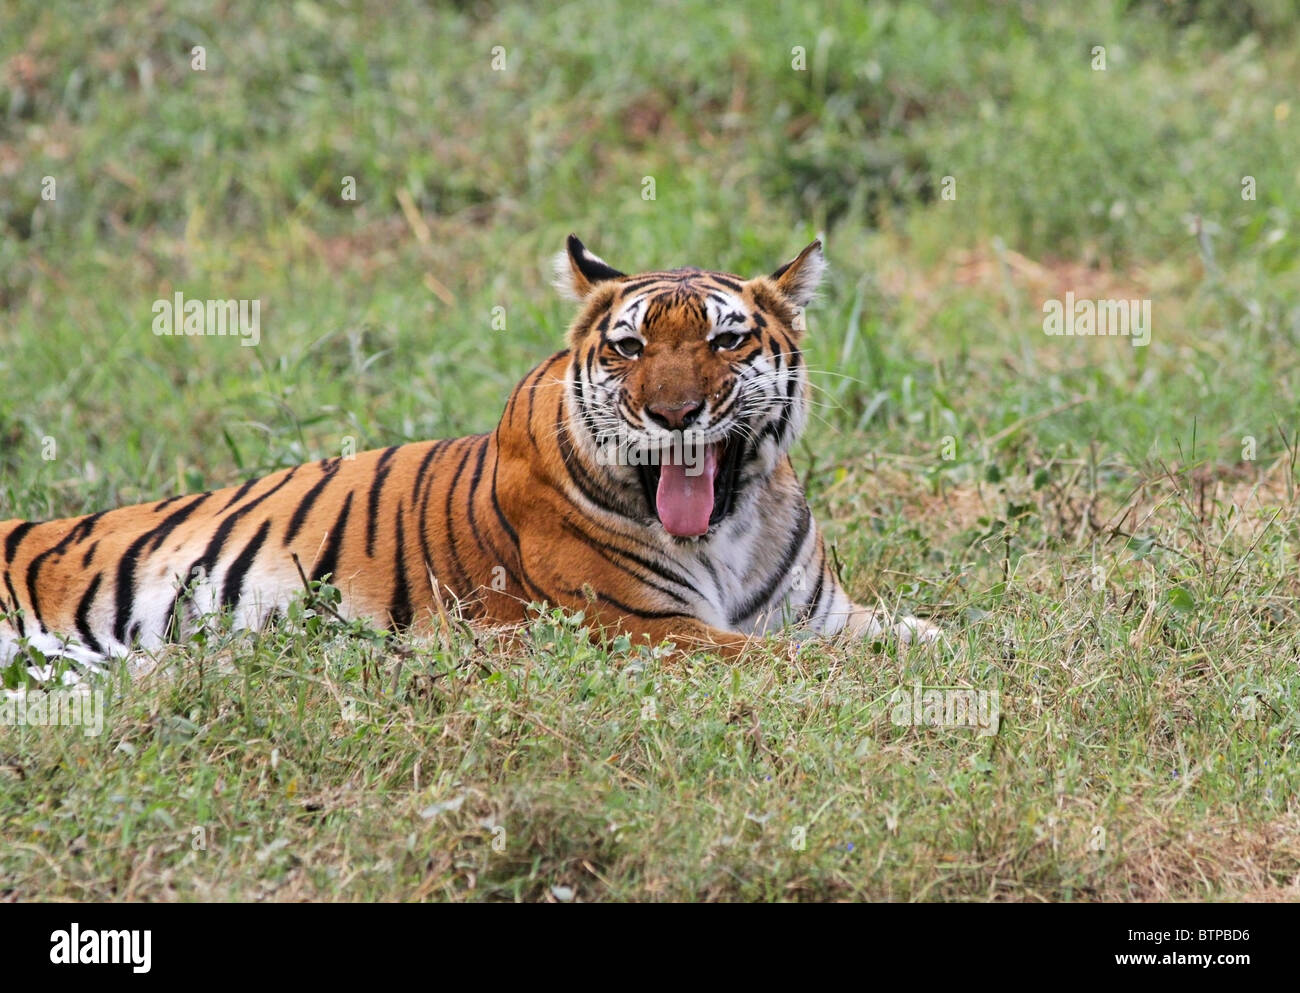 Tiger sitting in its enclosure in New Delhi Zoo, India Stock Photo